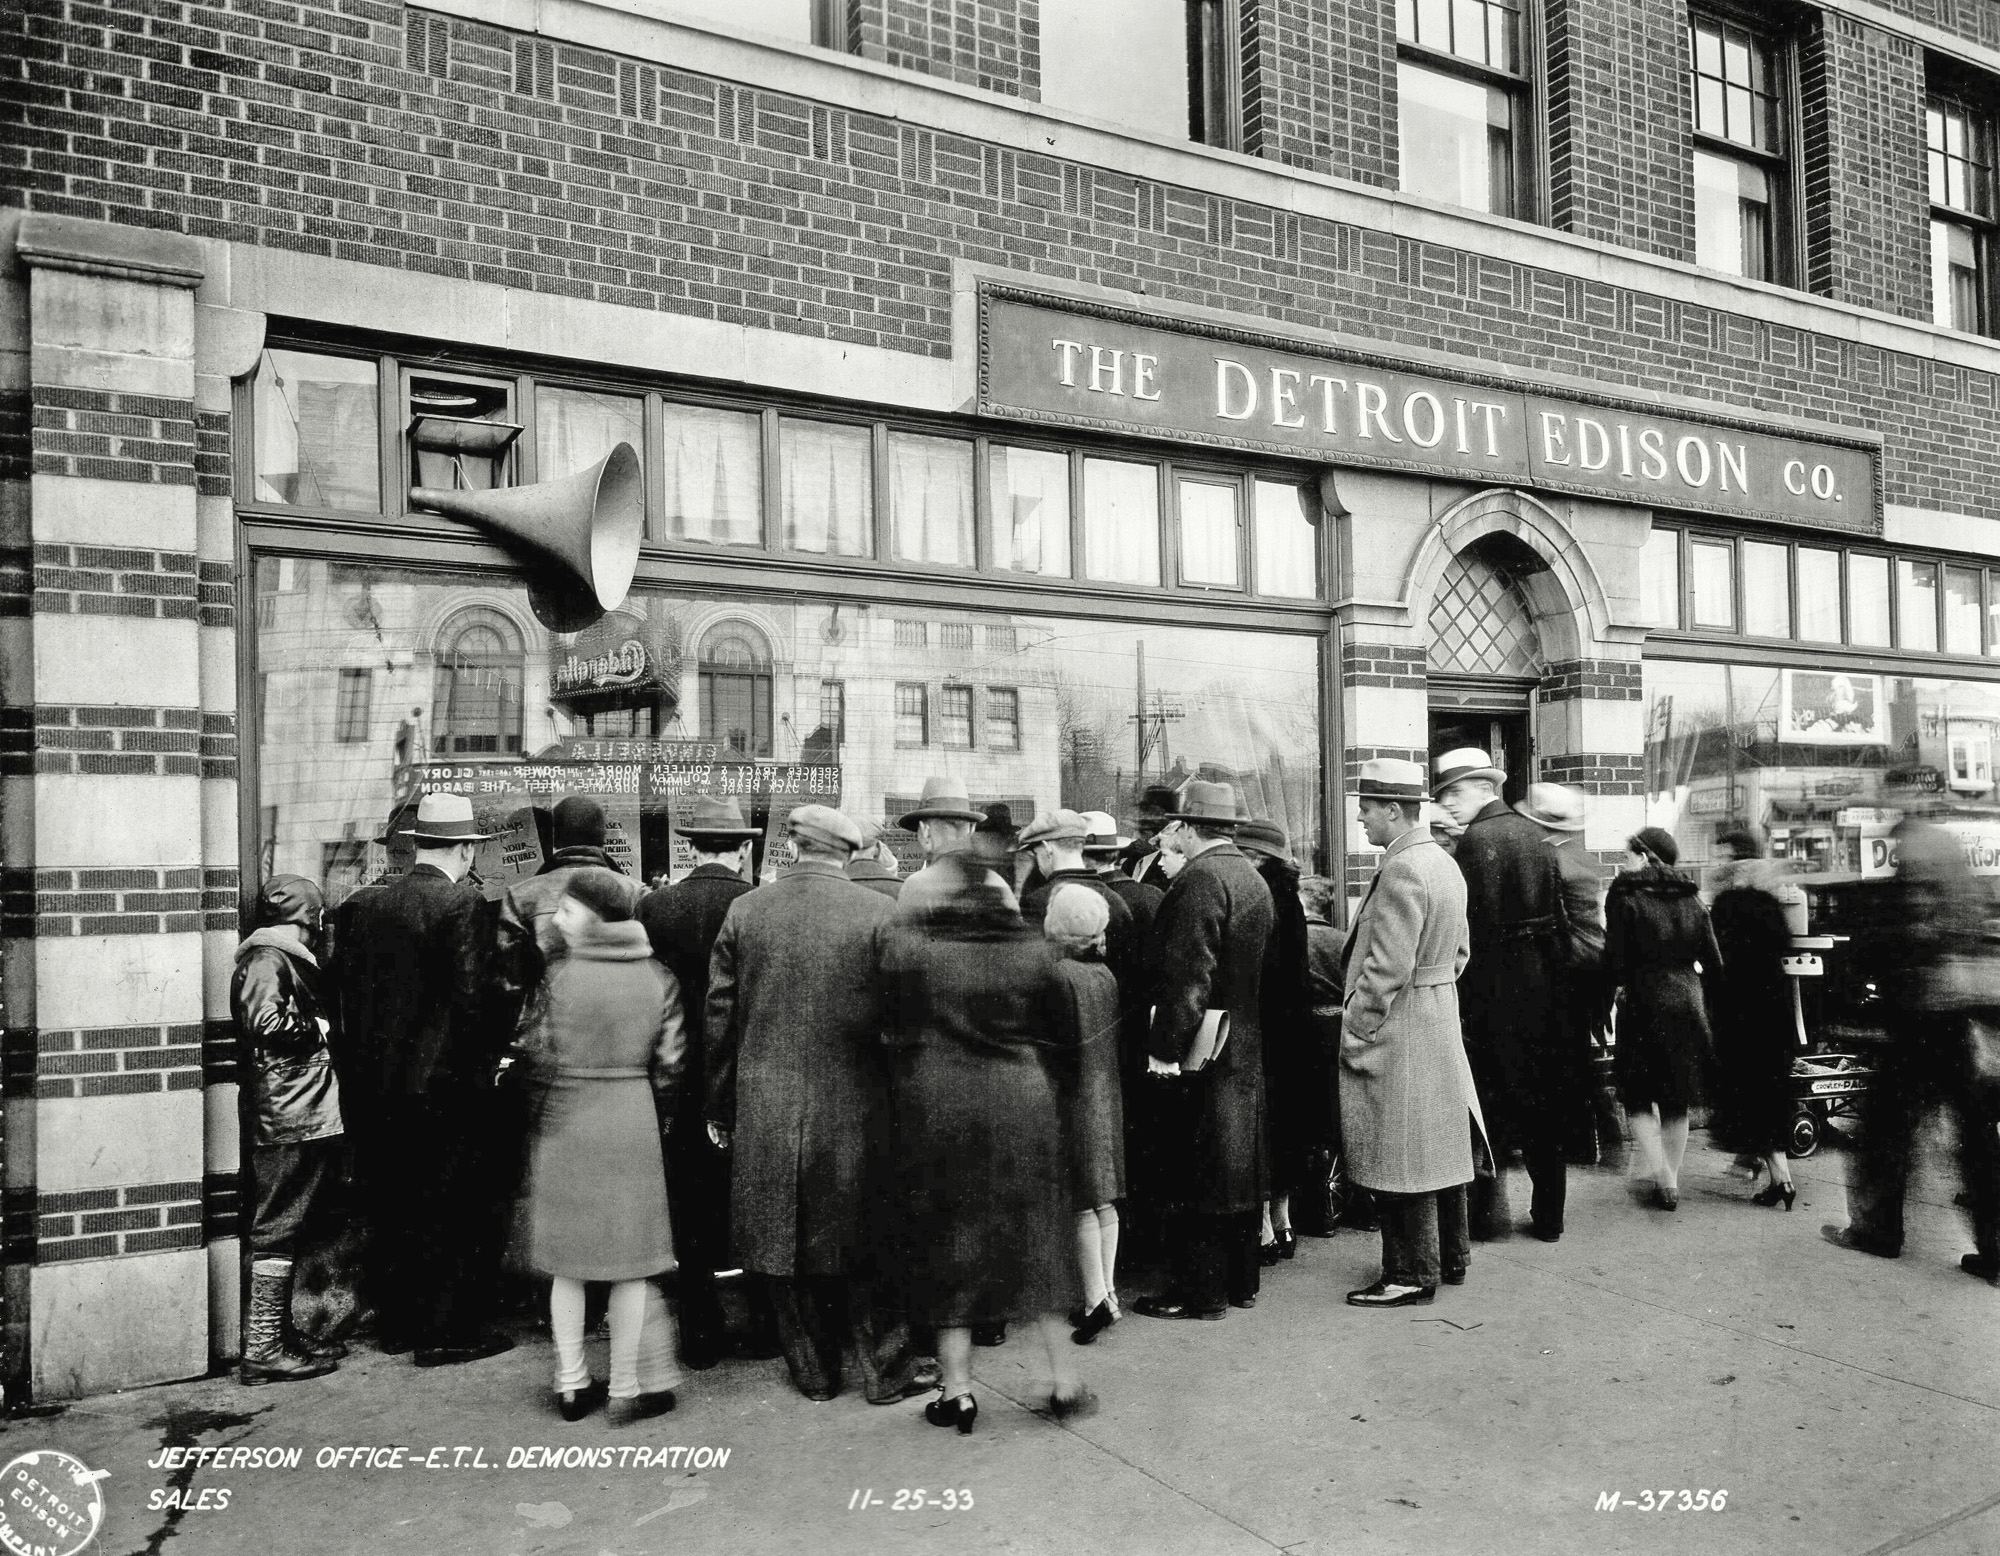 The Detroit Edison Company, Jefferson Sales Office demonstration, November 11, 1933. Reflection in window shows that Spencer Tracy, Colleen Moore, Jack Pearl and Jimmy Durante were staring in a movie across the street. Photo by Detroit Edison Company Photographic Department. View full size.